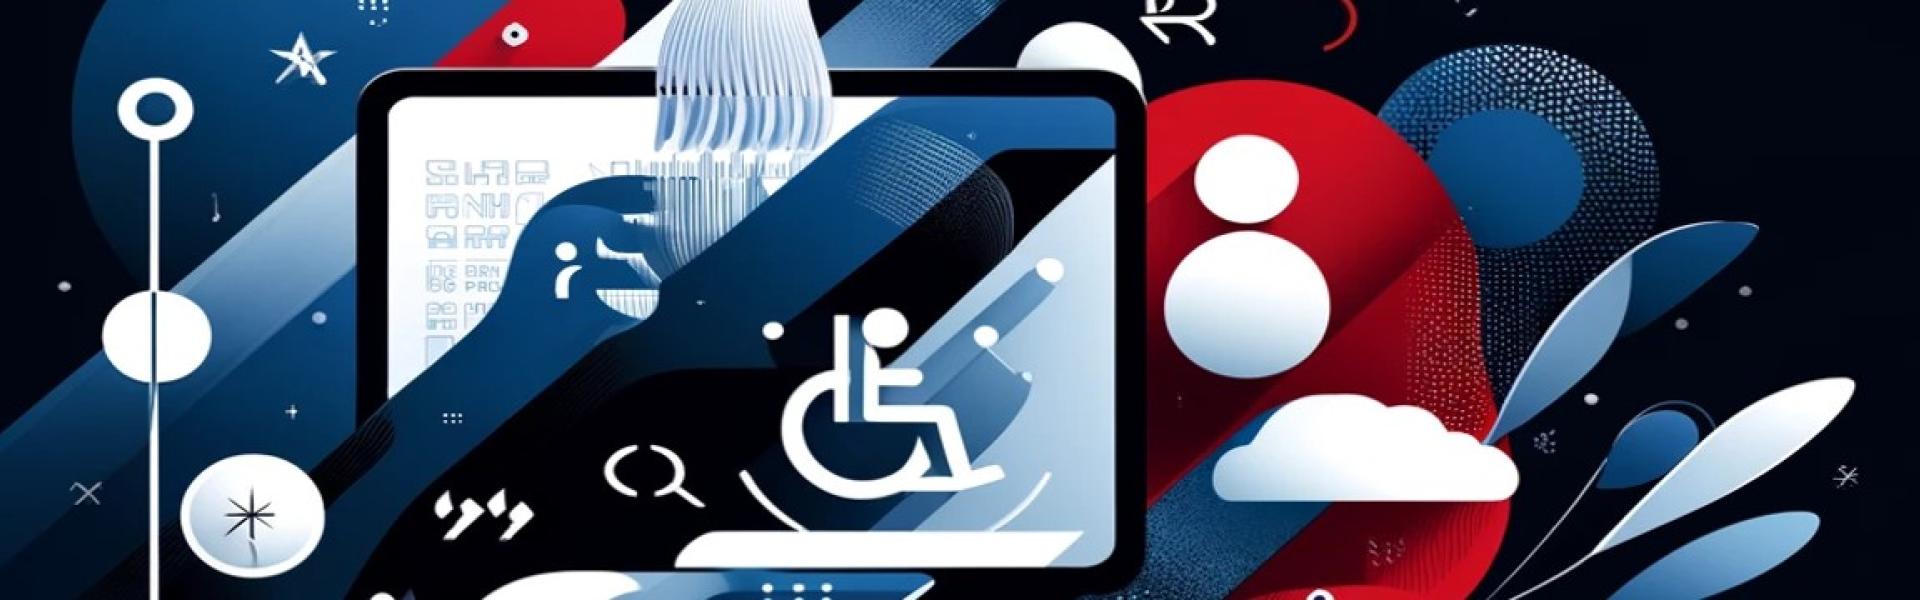 Abstract depiction of digital accessibly and assistive technology